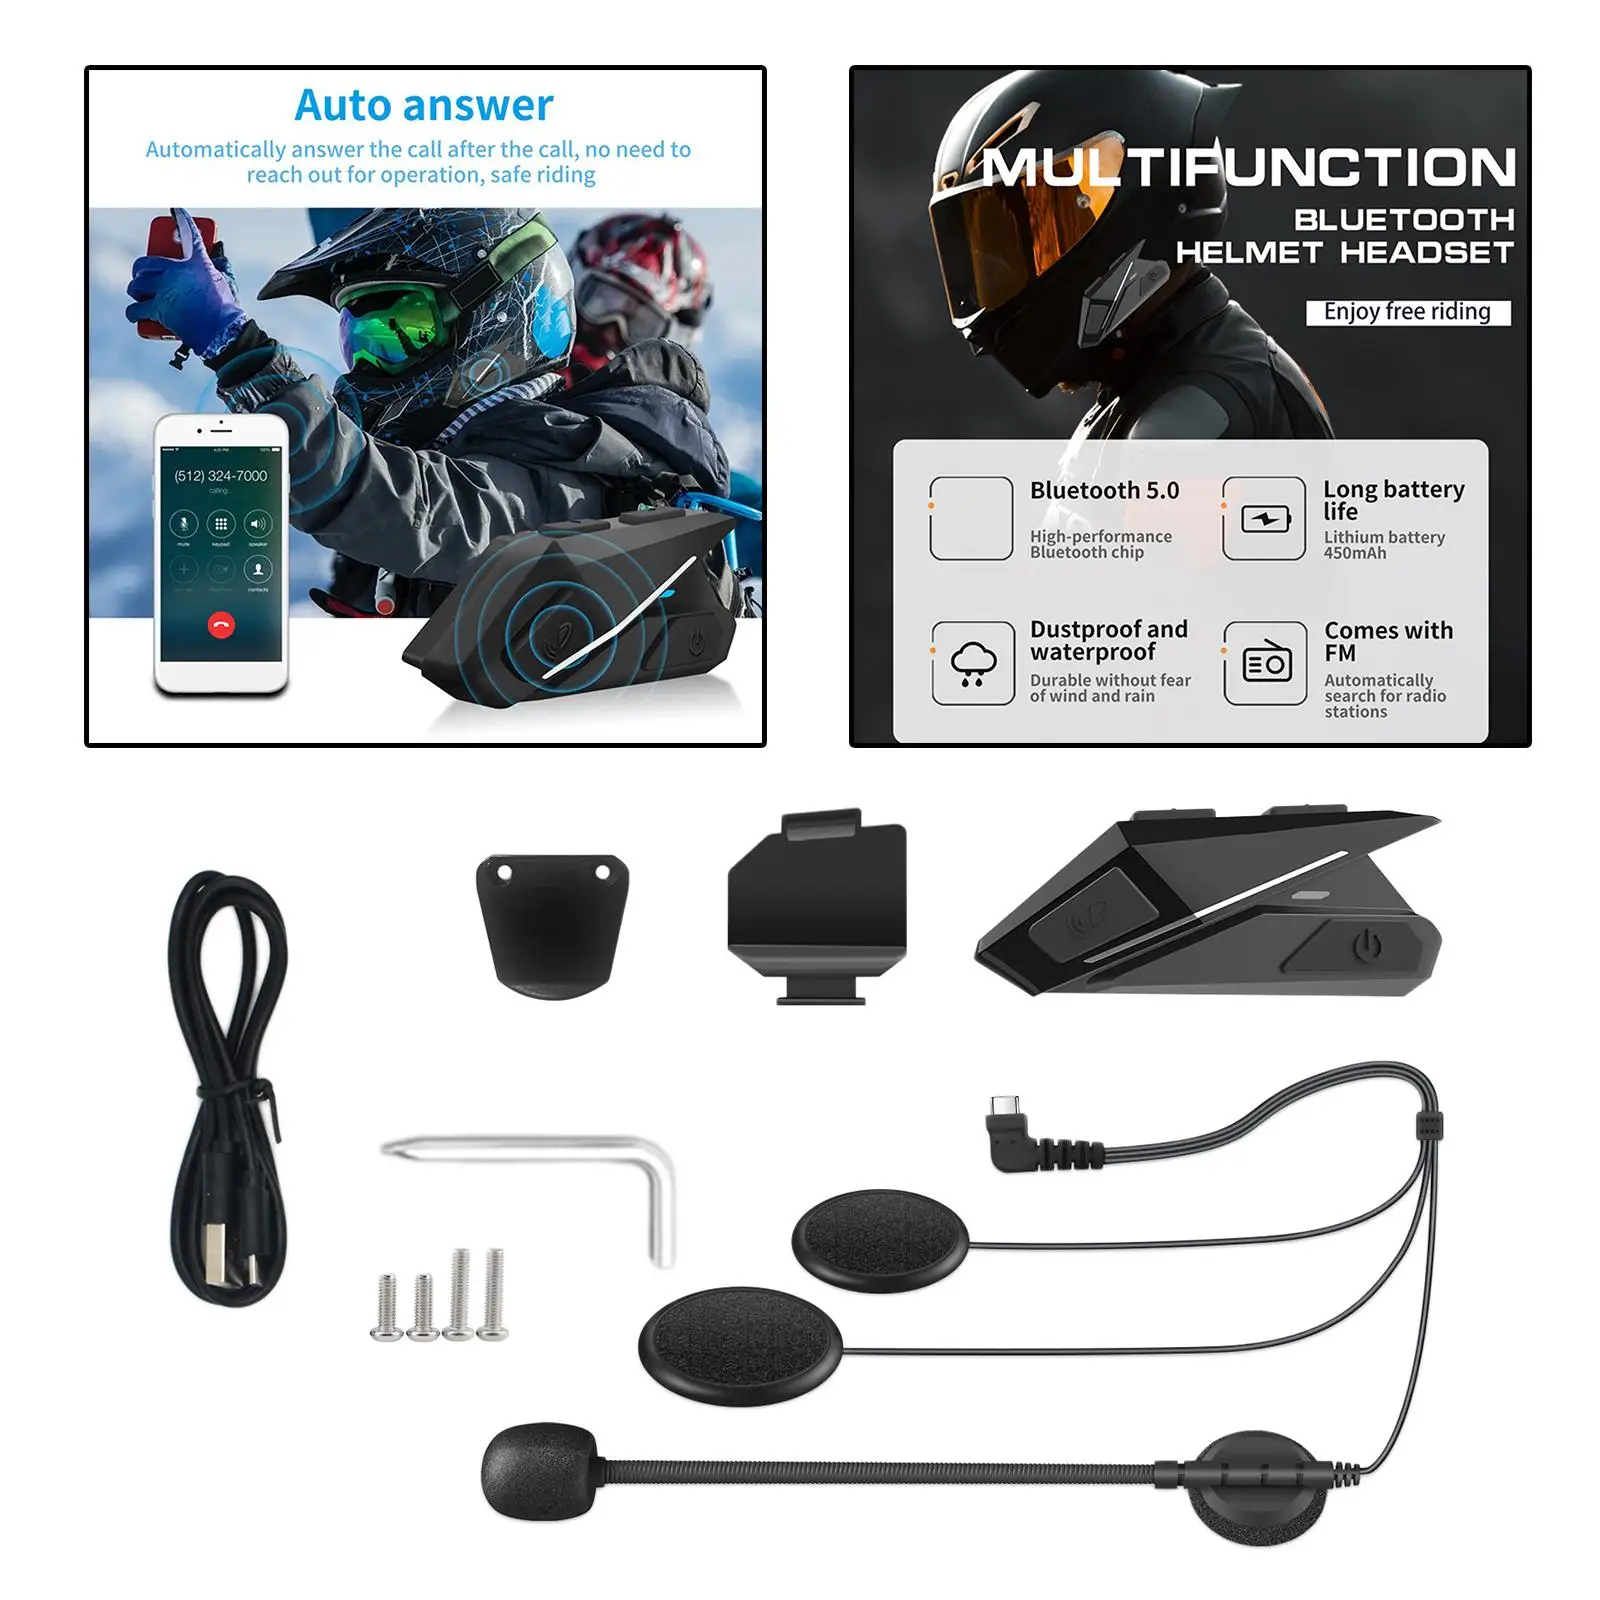 Motorcycle Bluetooth 5.0 Headset 450mAh Battery for Express Delivery Riding